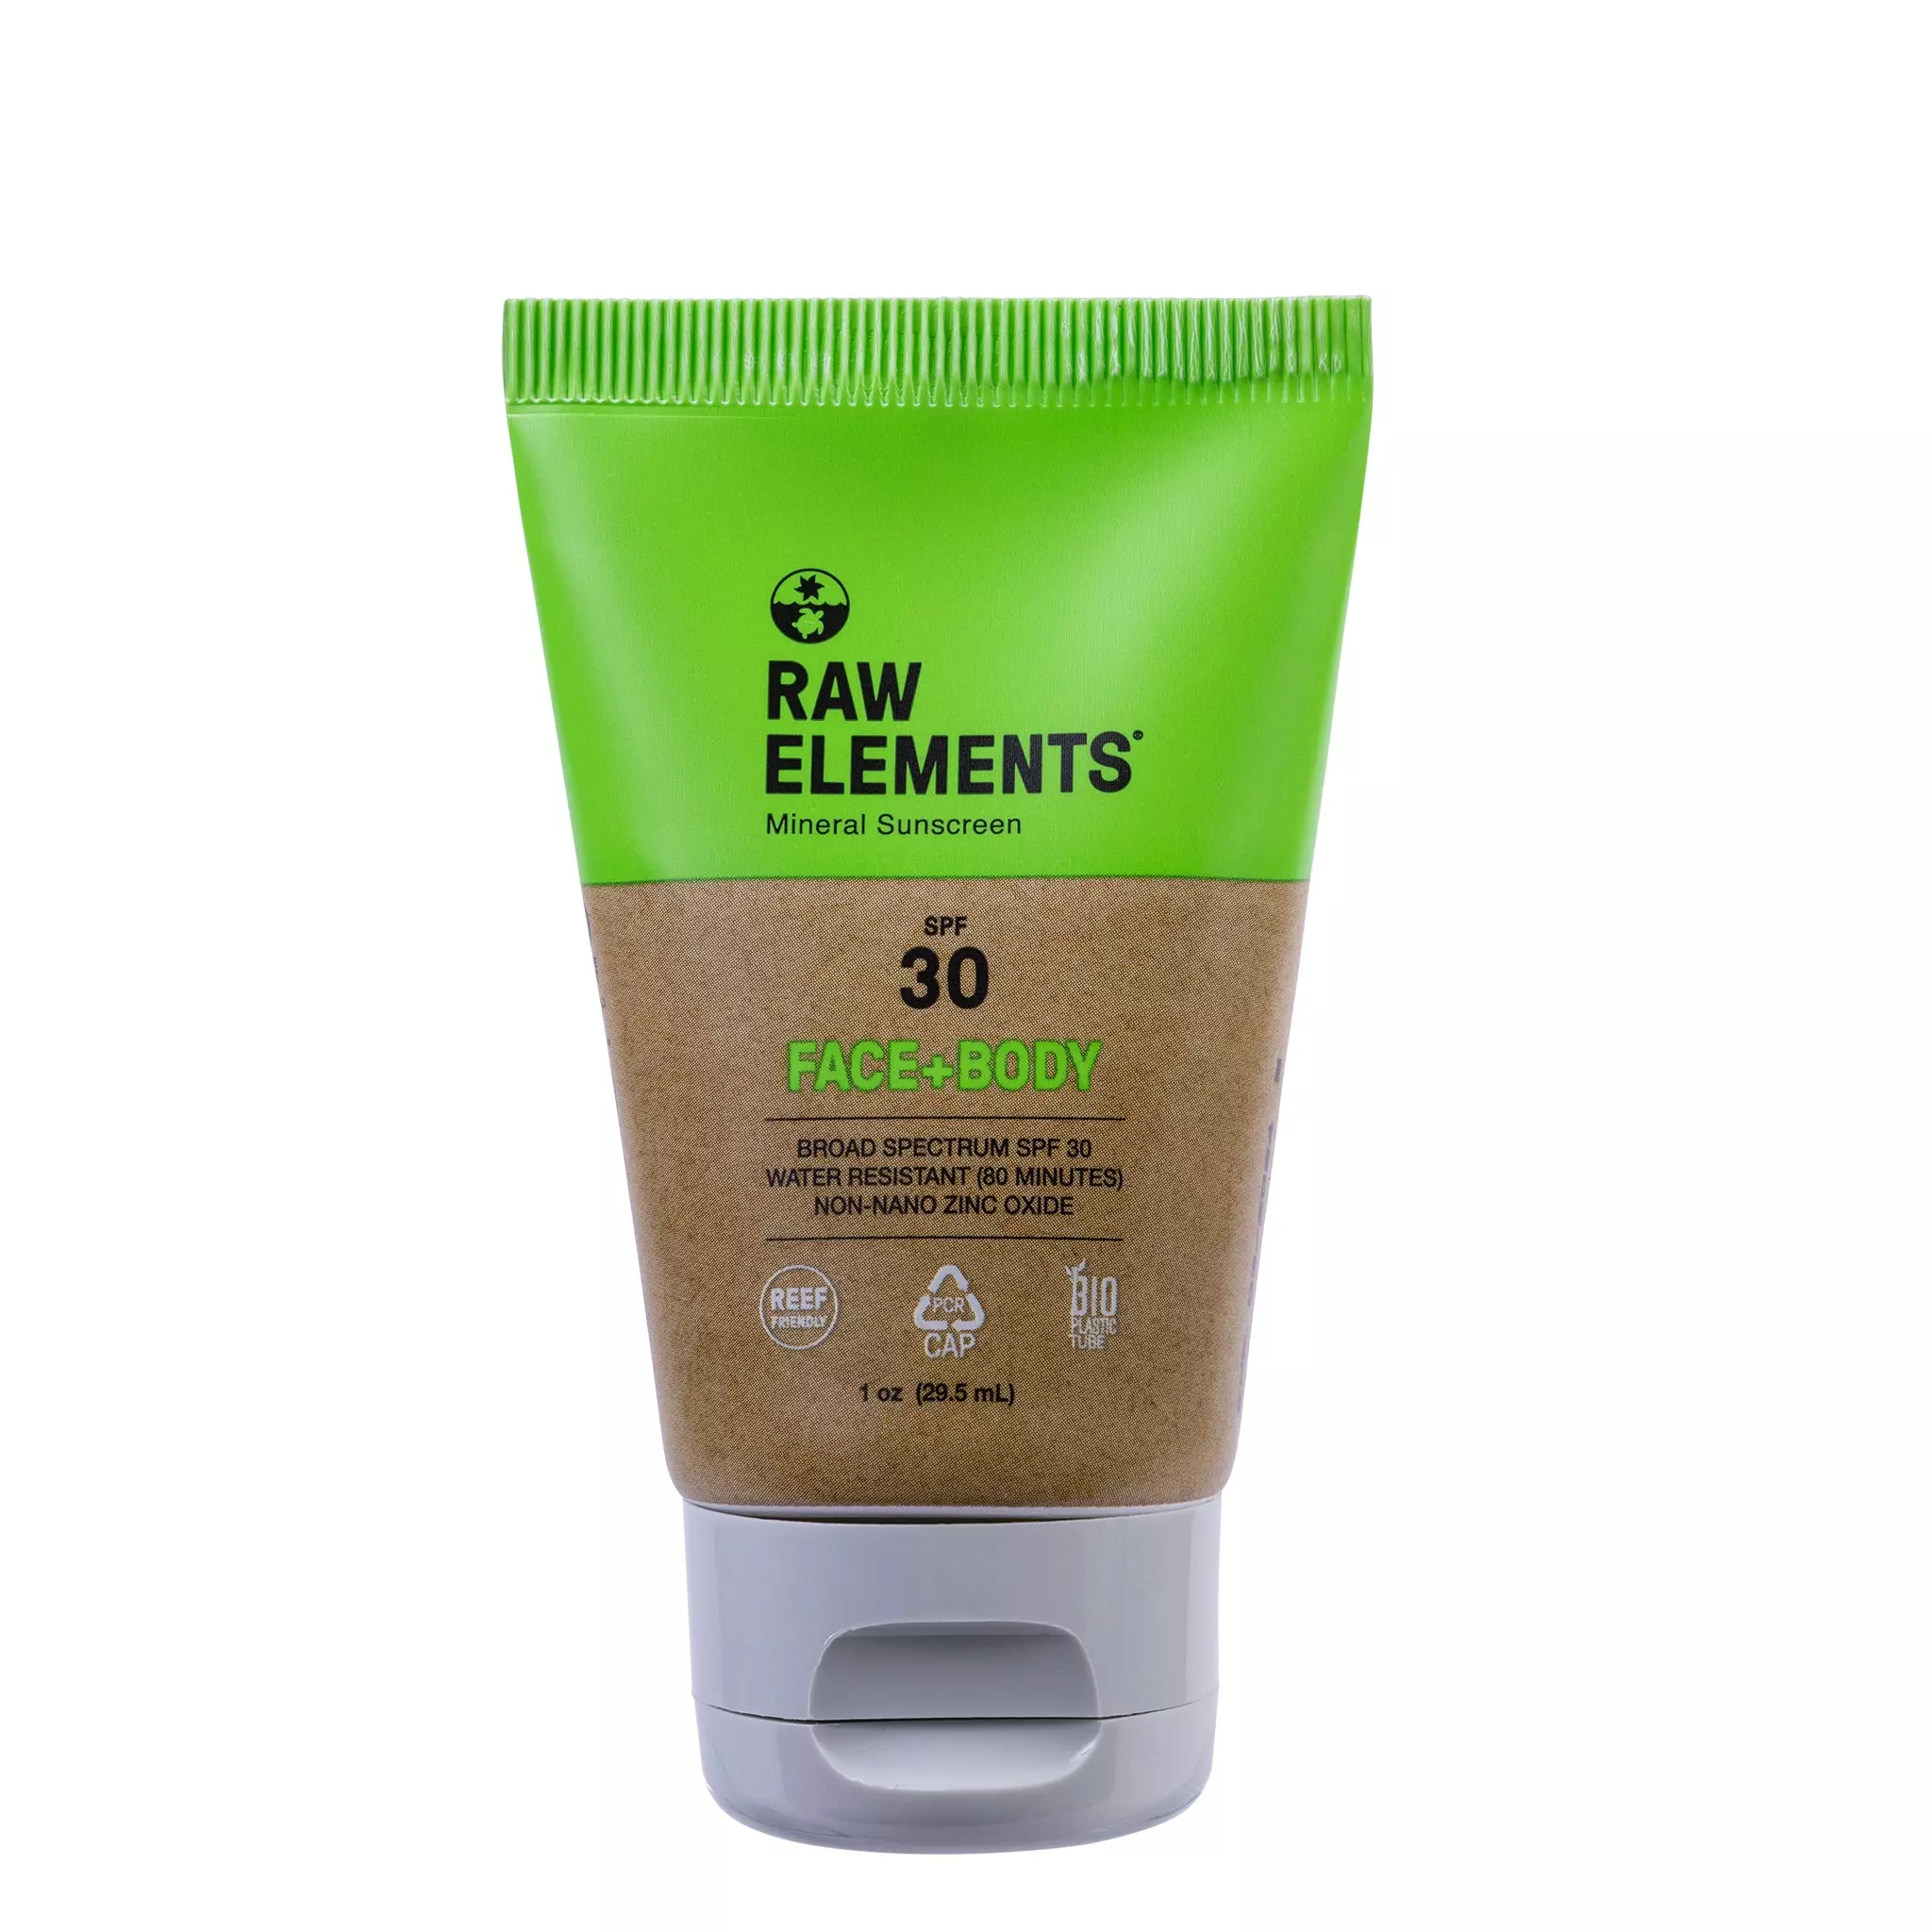 Raw Elements Certified Natural Sunscreen